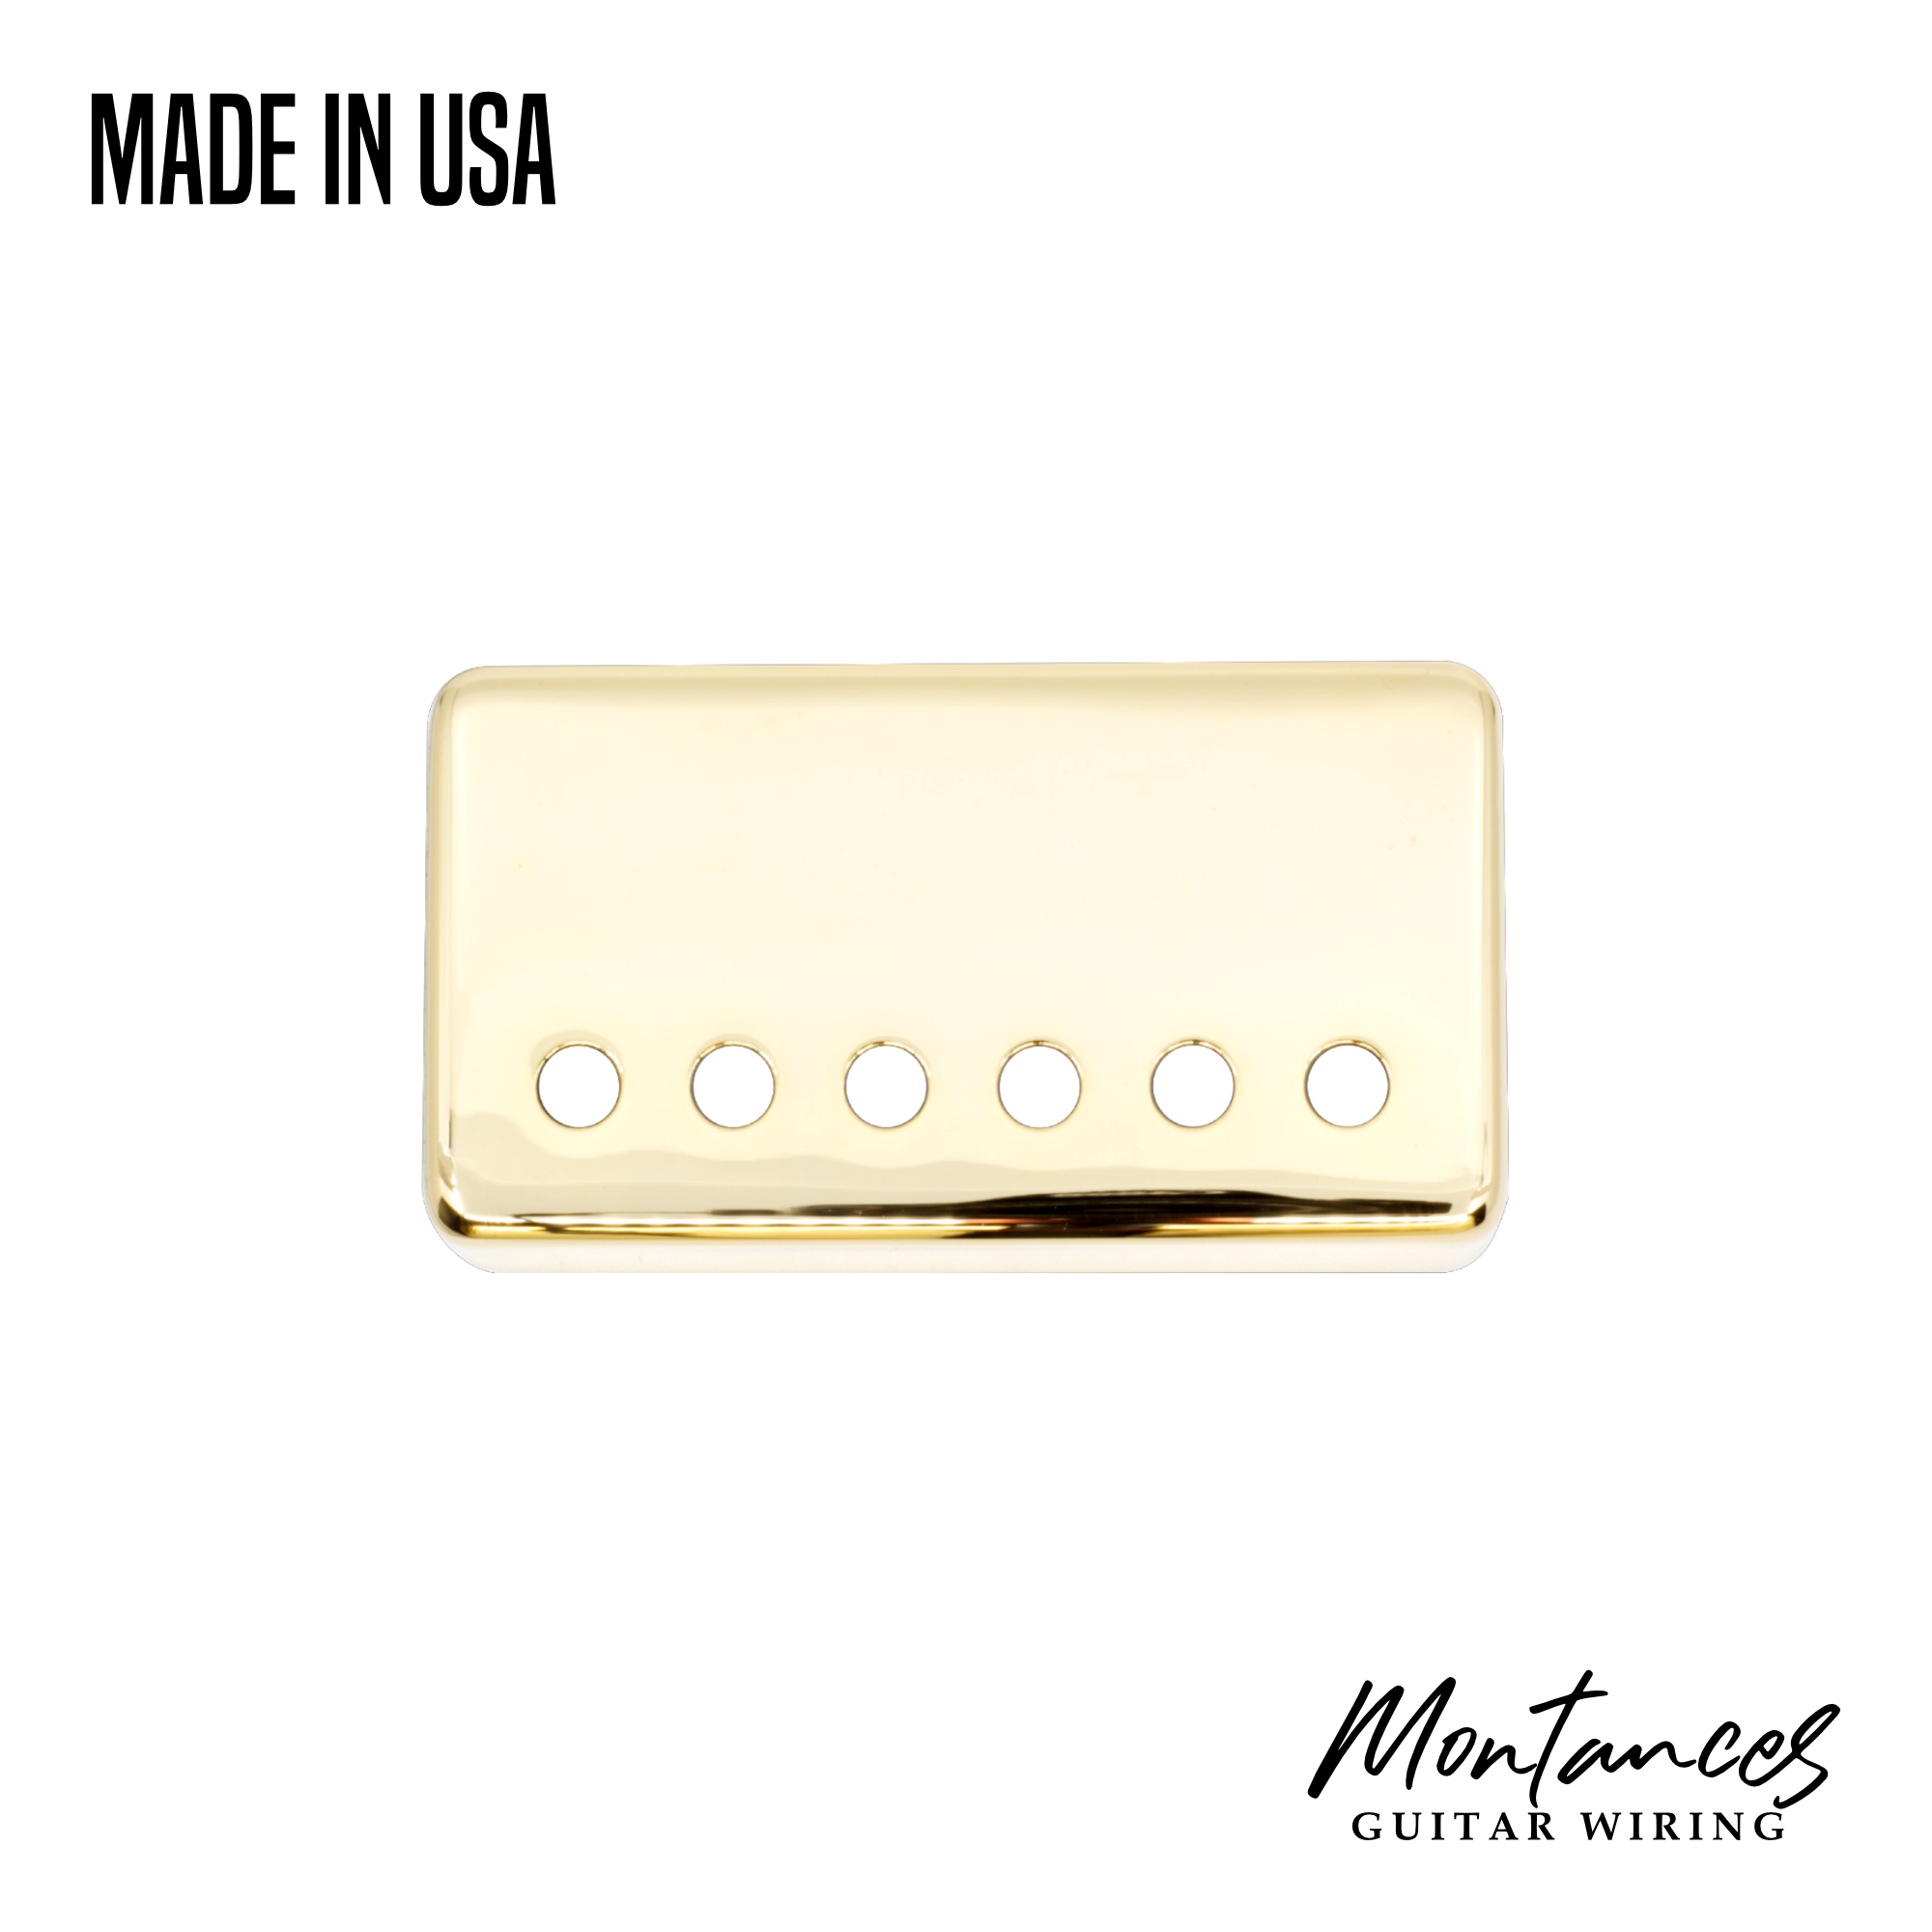 Pickup Cover - Humbucker, 50mm & 52mm, Nickel Silver, made in USA